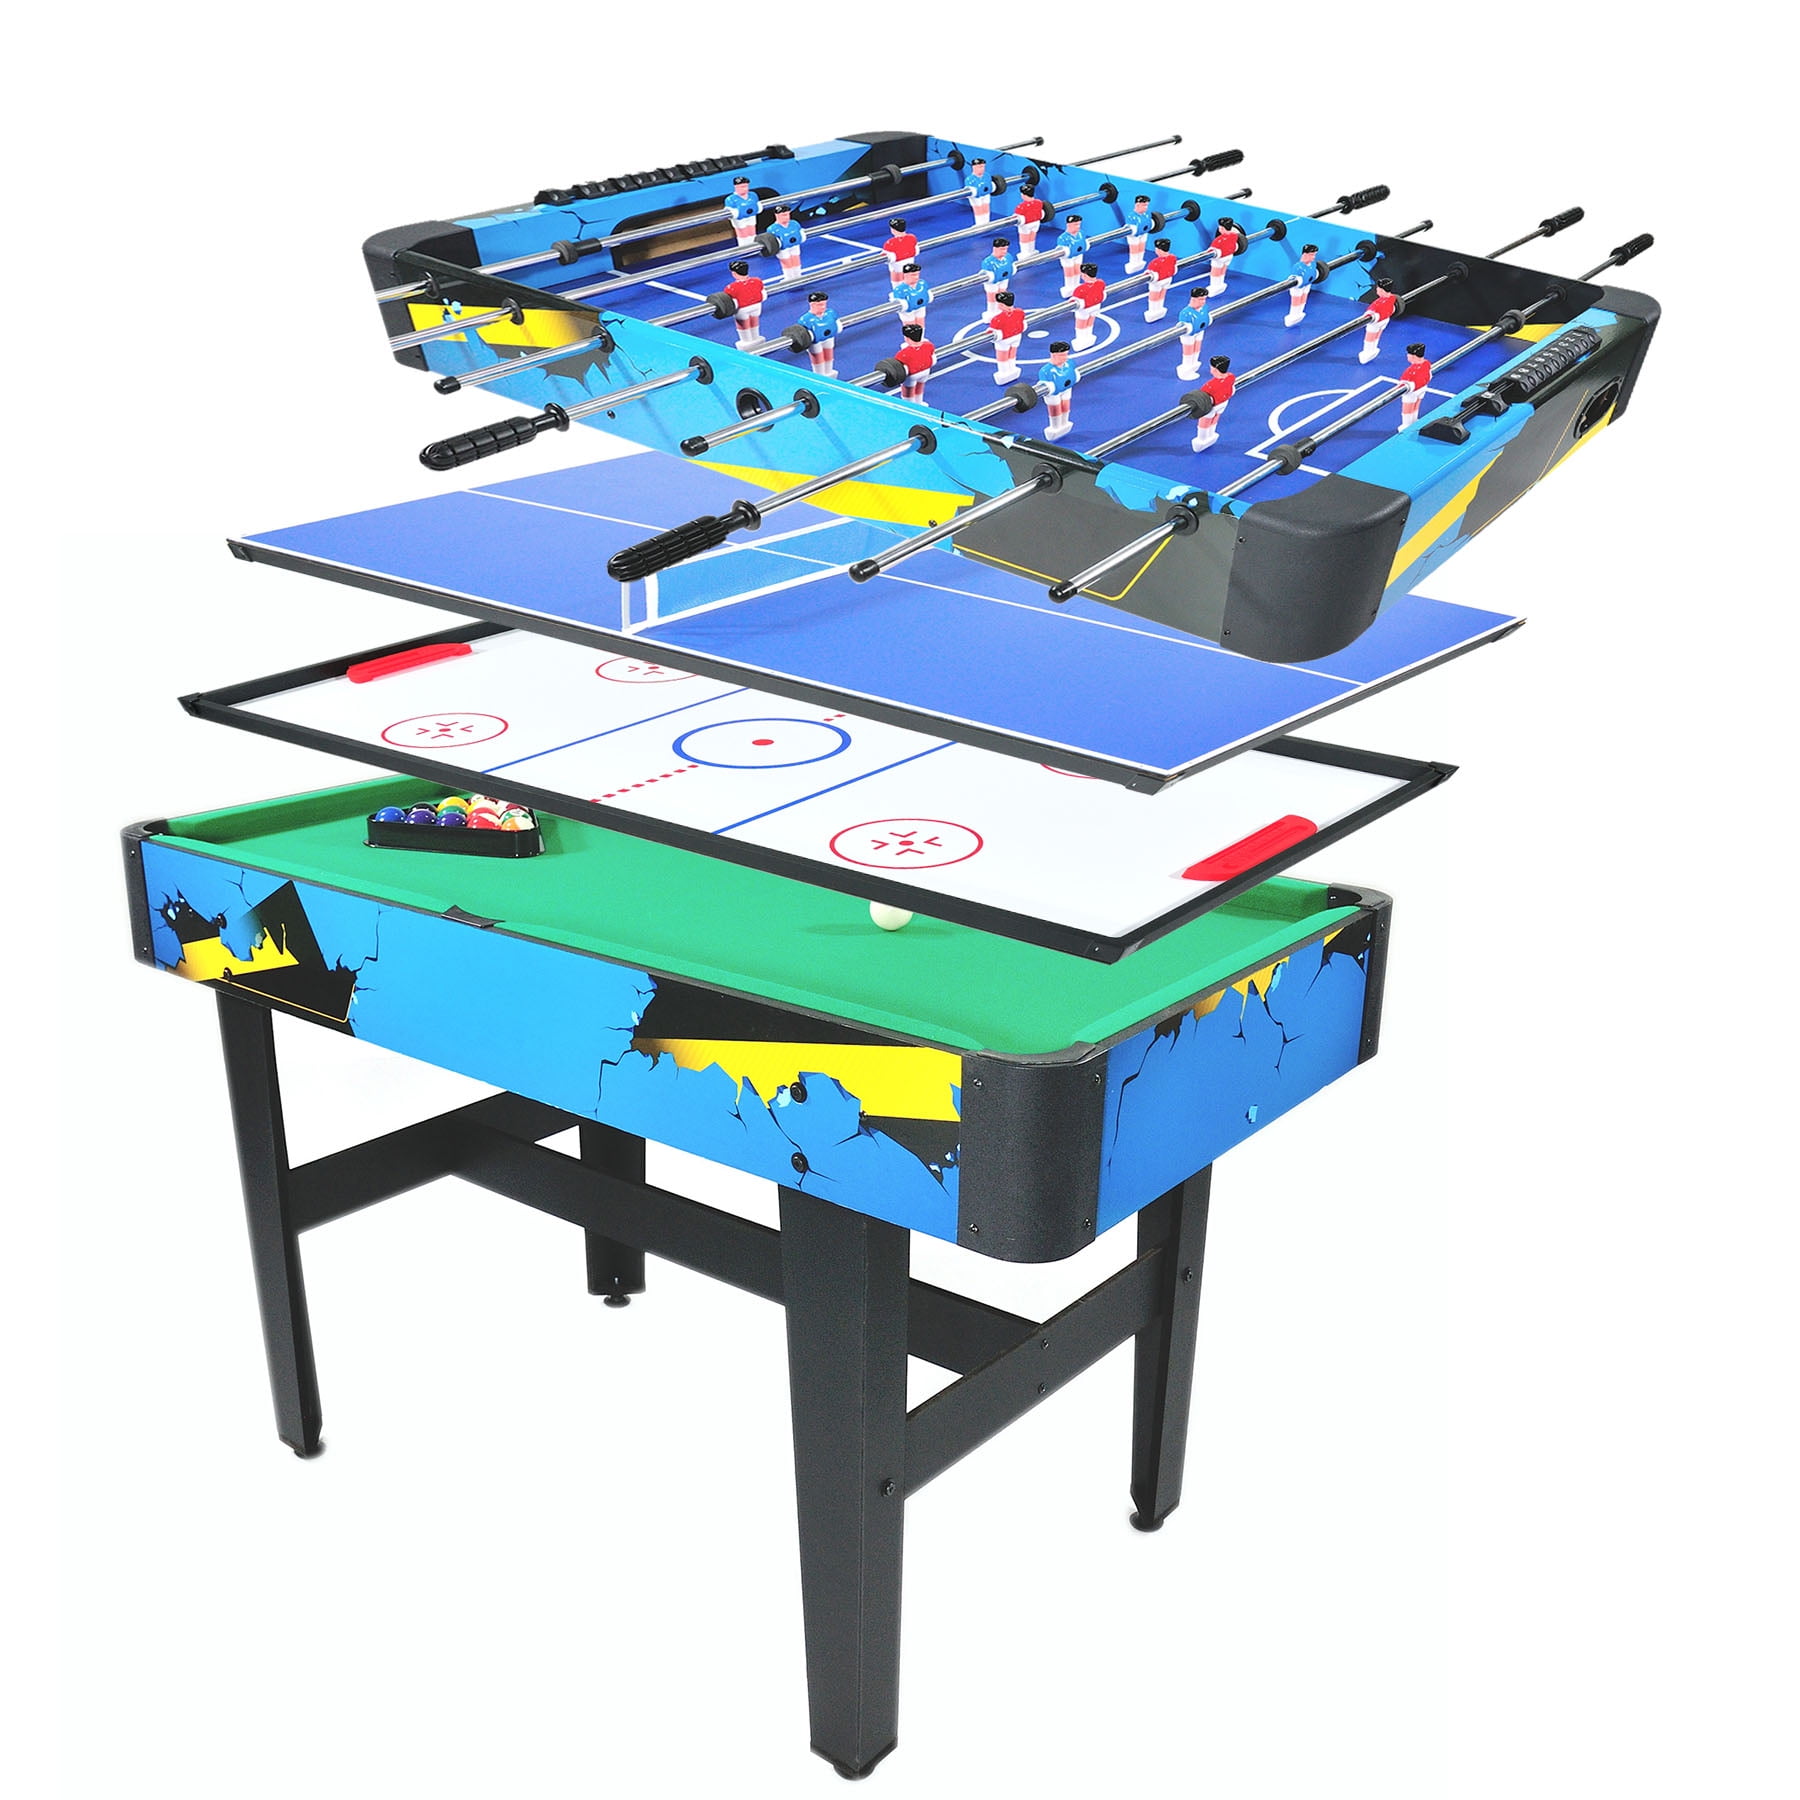 EastPoint Competition Sized Foosball Table Soccer Game Room Arcade Hockey Air 